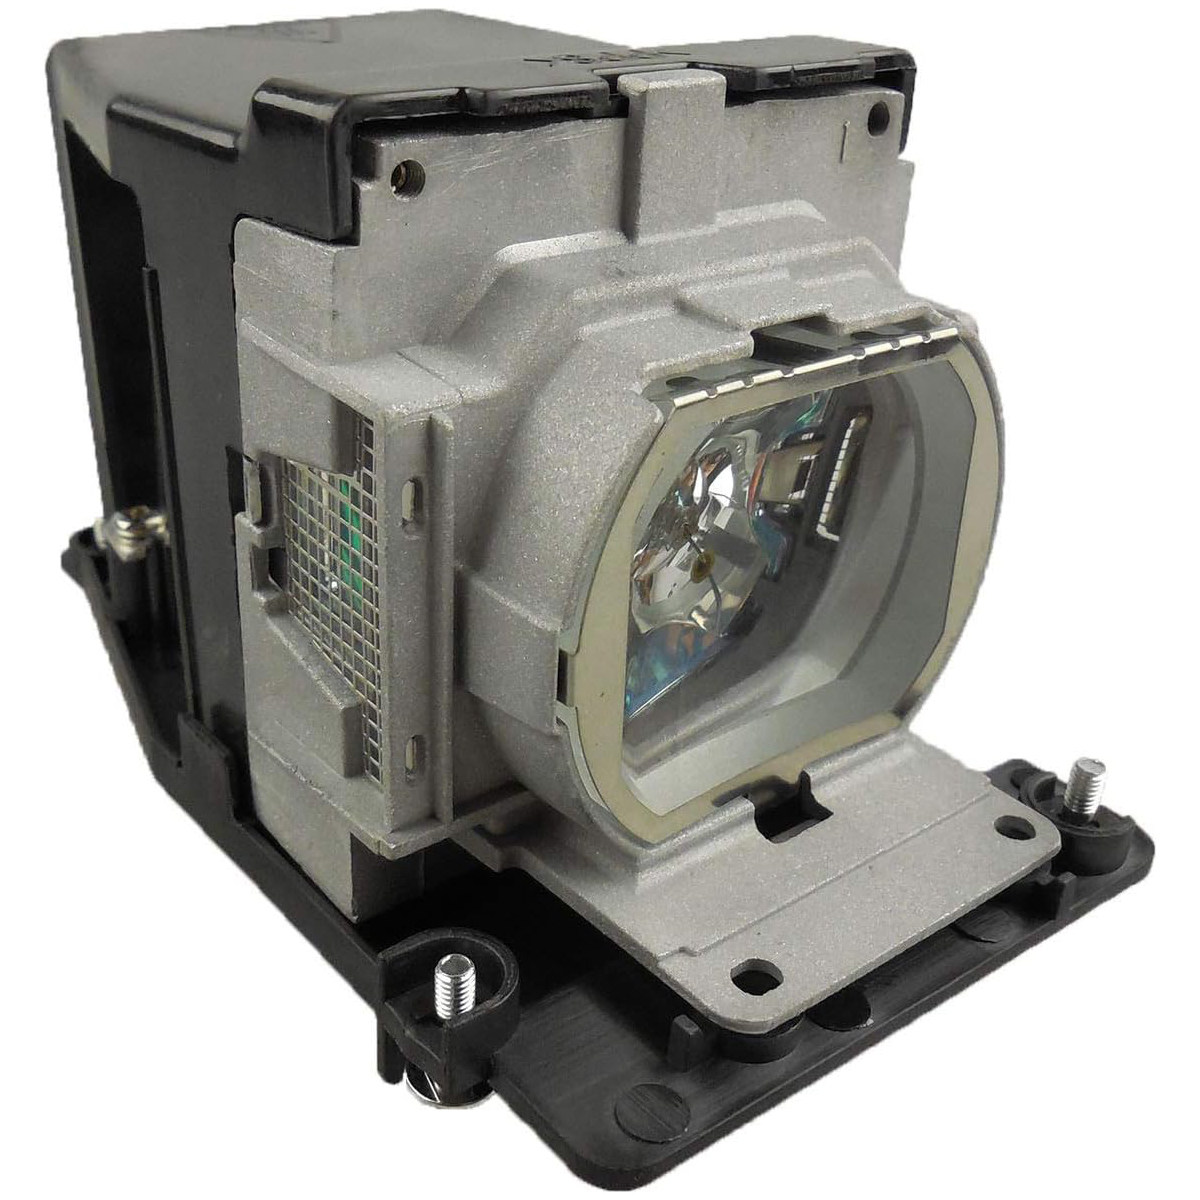 Replacement Projector lamp TLPLW11 For Toshiba TDP xd2700a TDP-XD3000 TLP WX2200